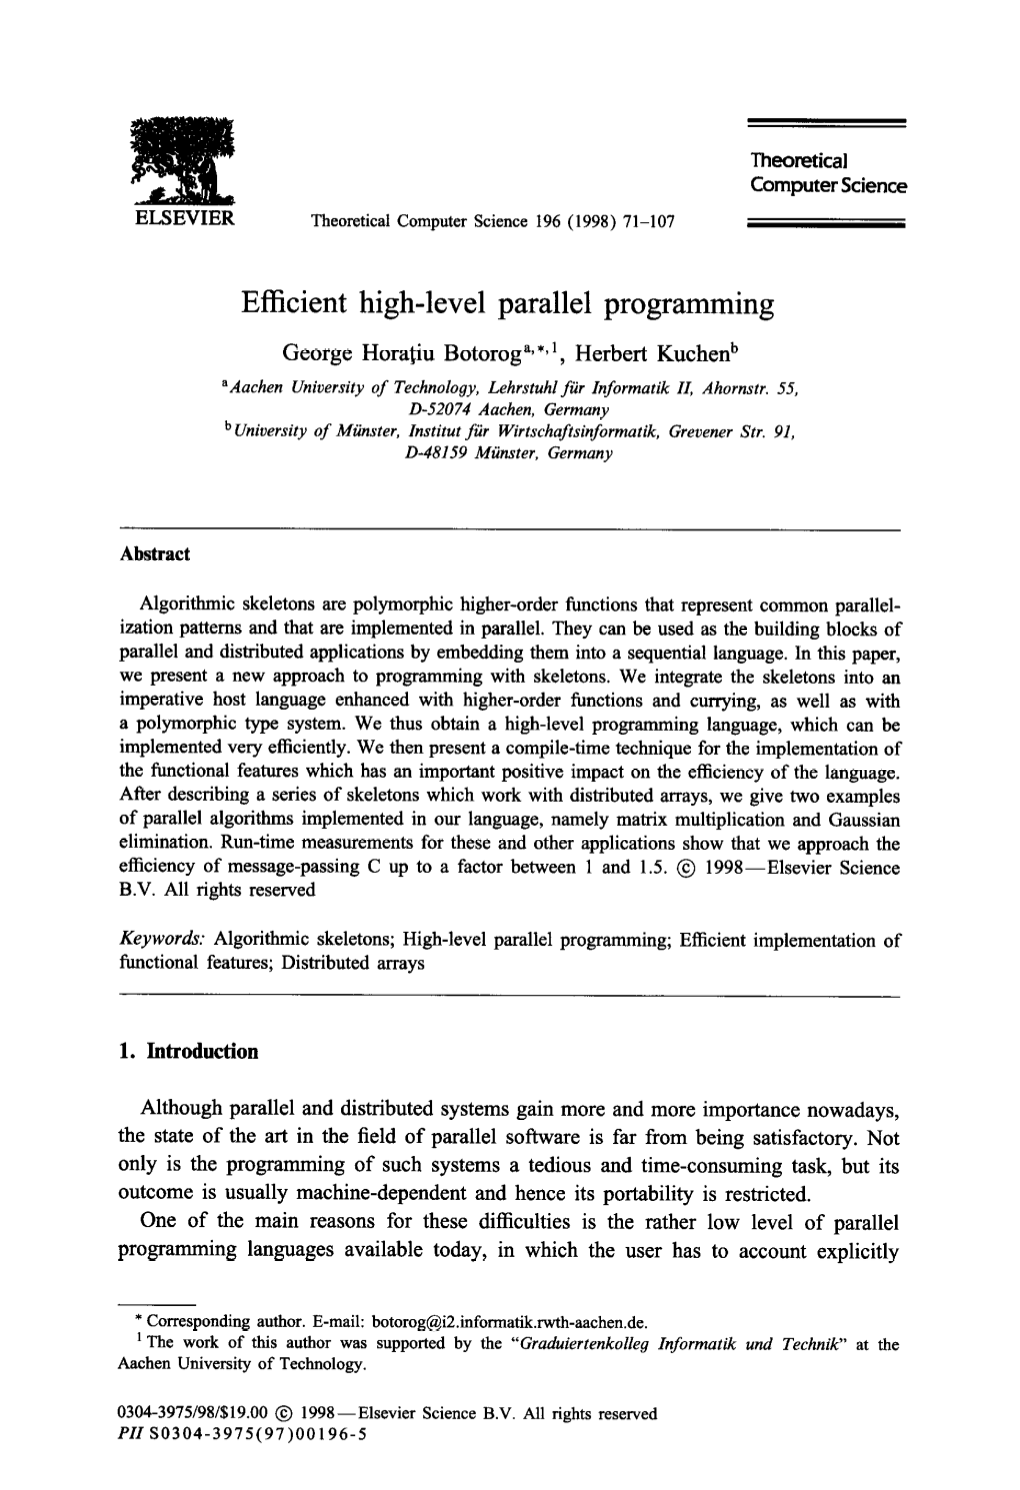 Efficient High-Level Parallel Programming